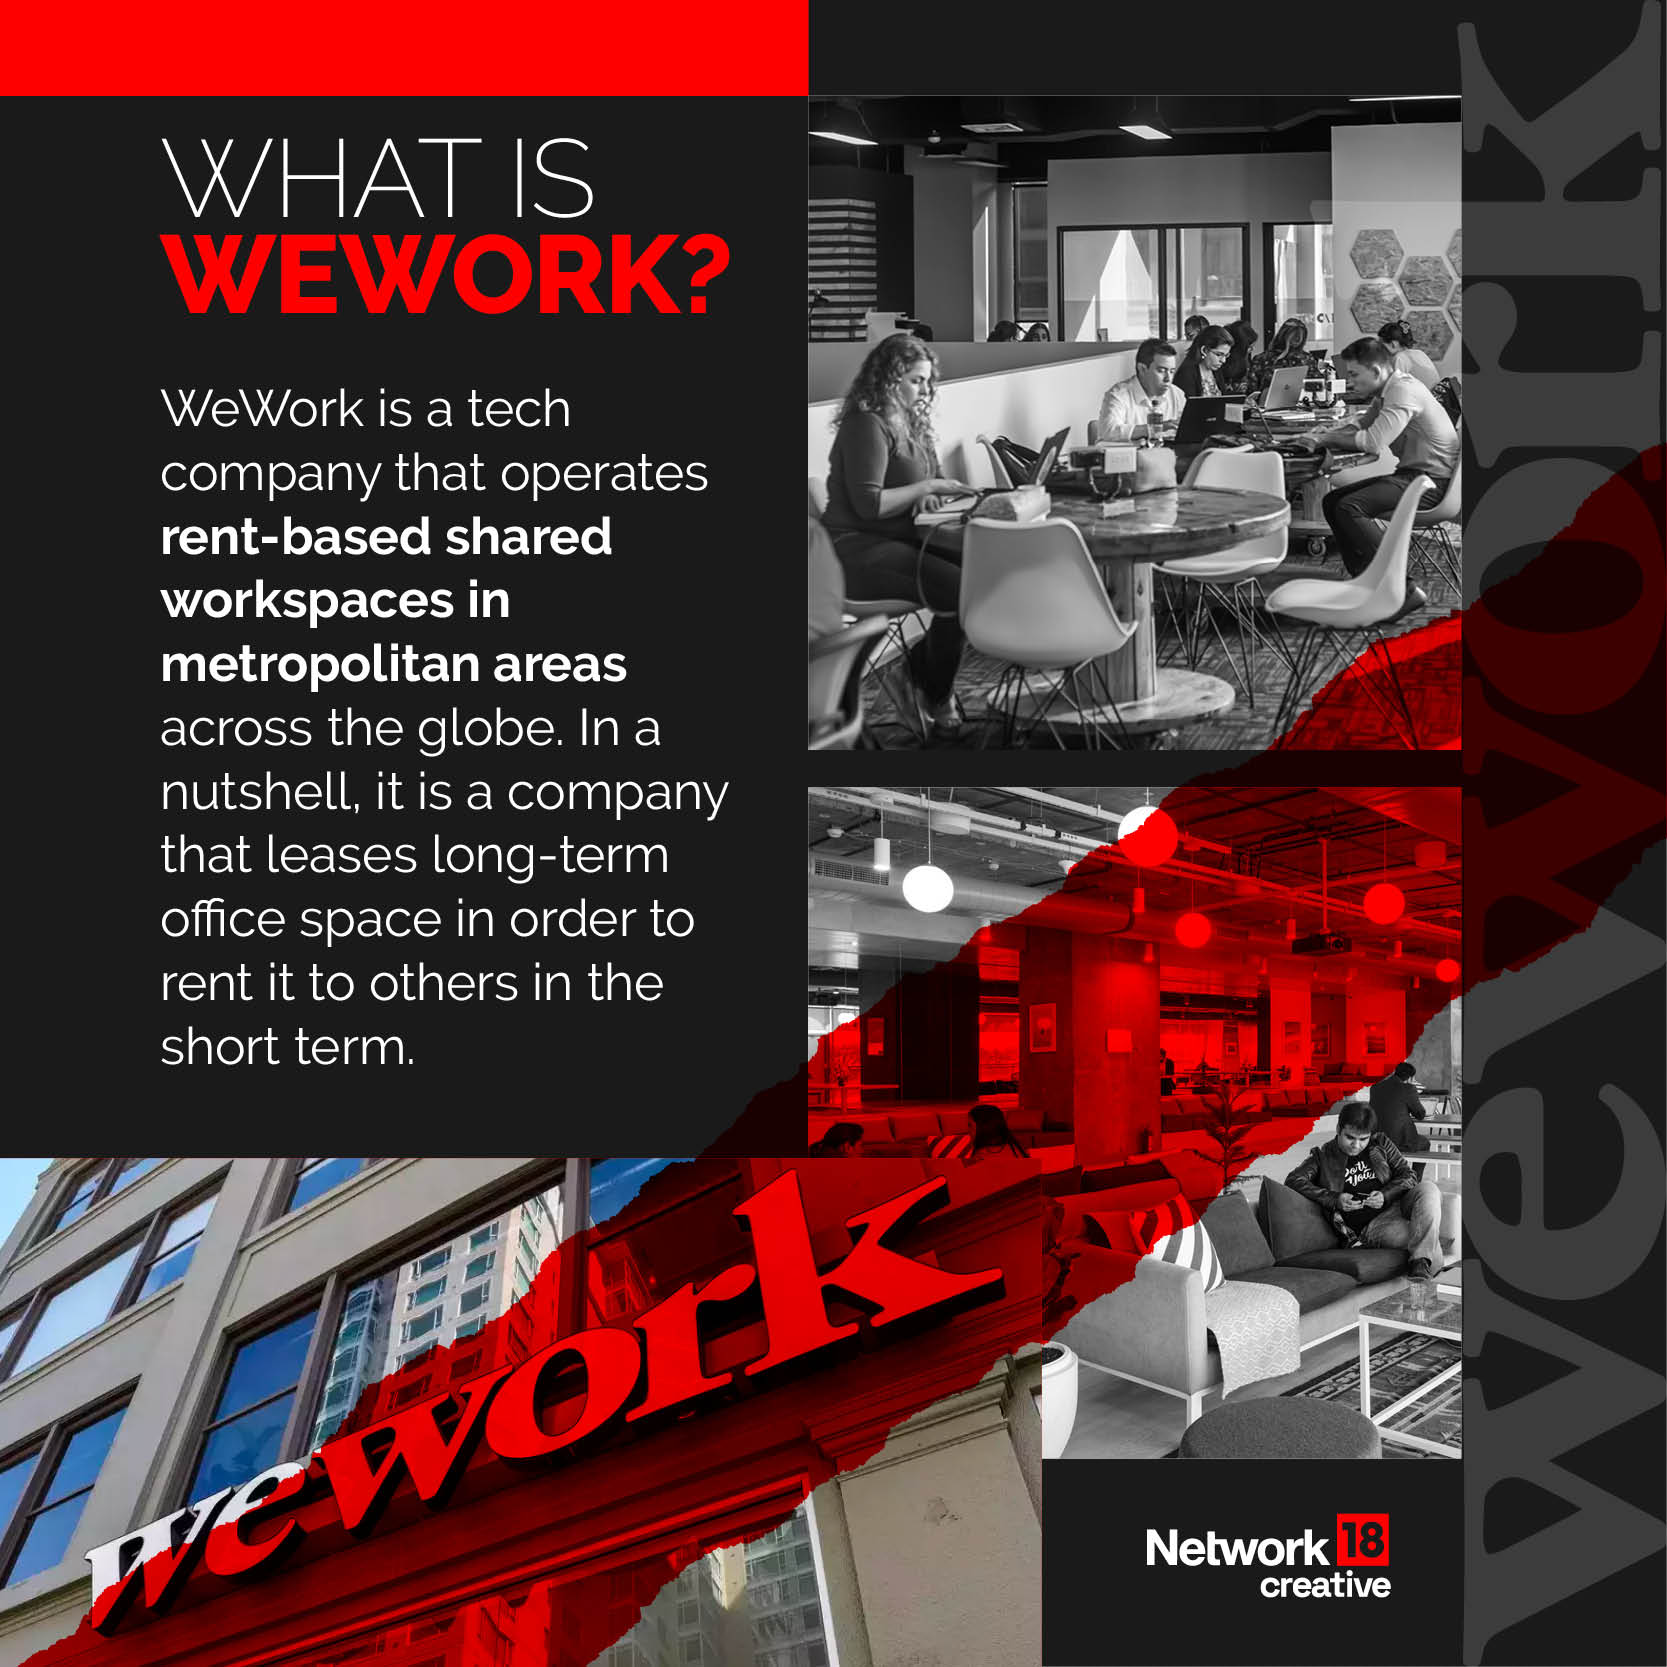 Why WeWork is not working now?